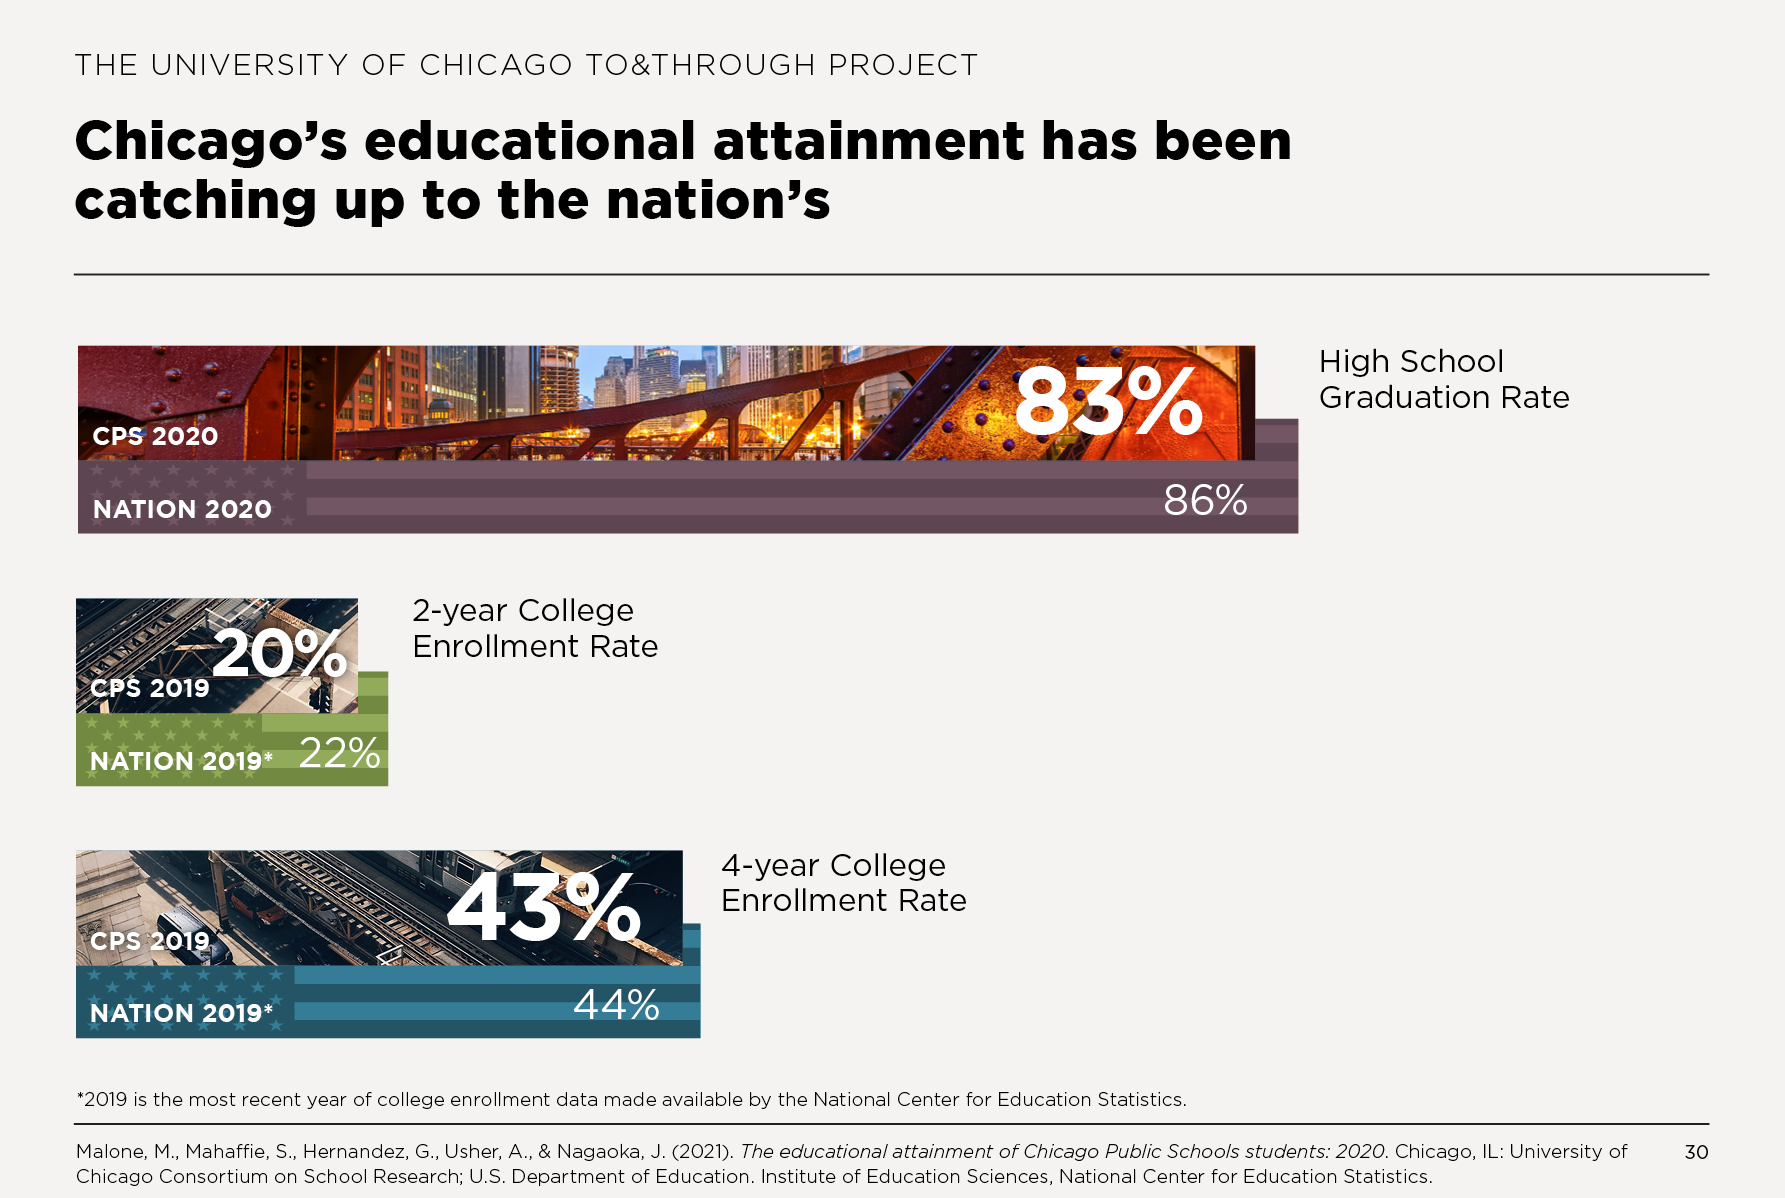 Chicago’s educational attainment has been catching up to the nation’s